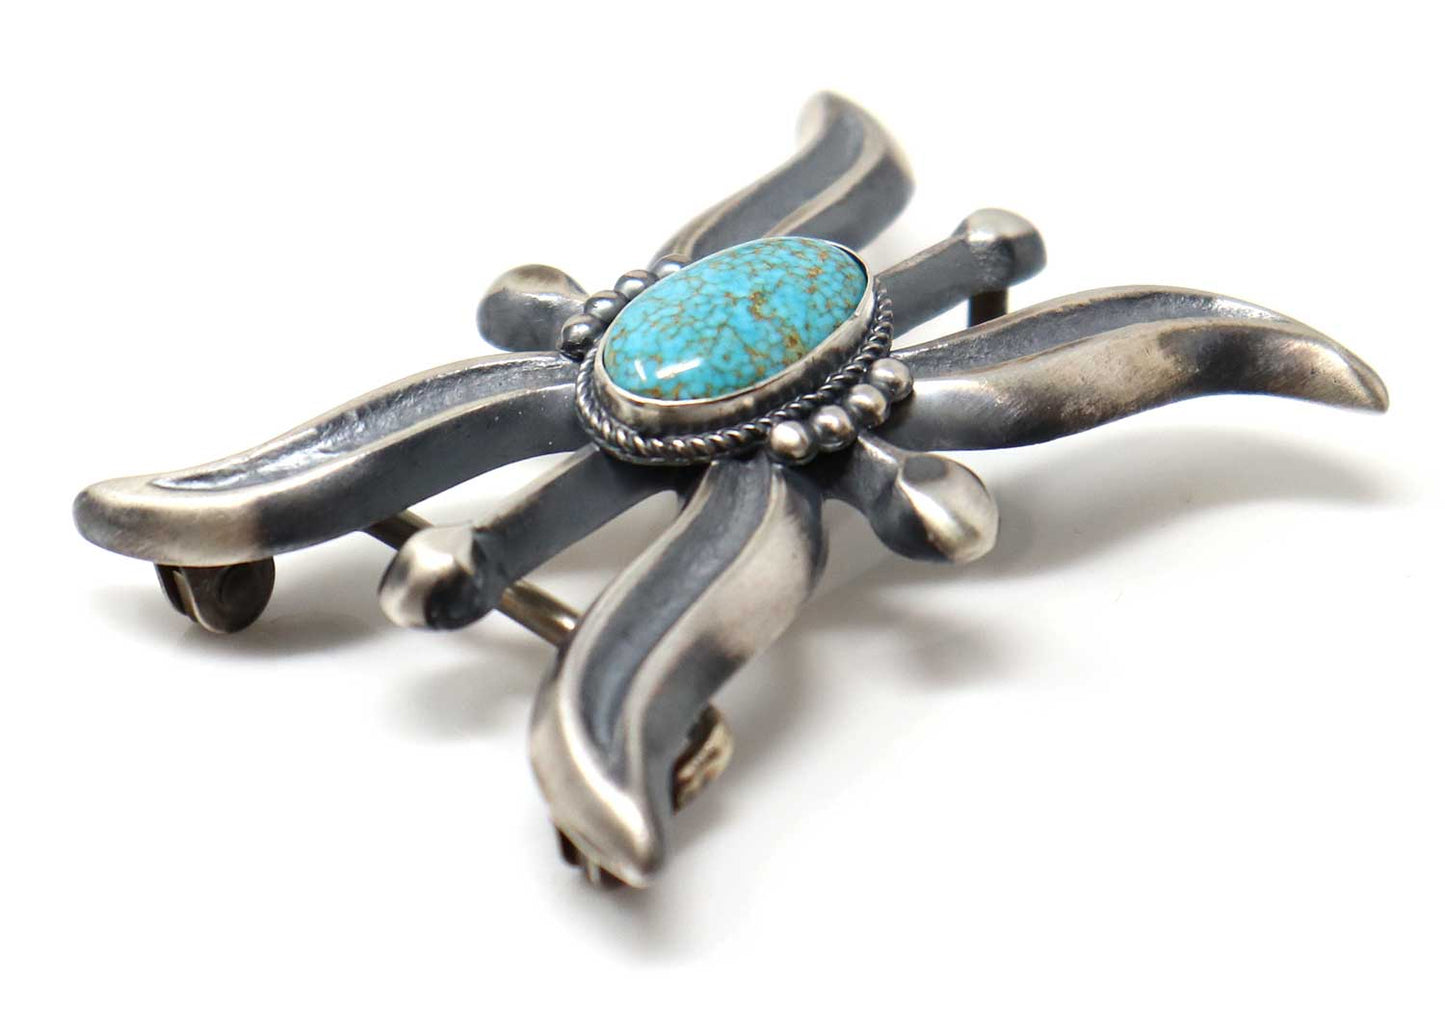 Turquoise & Silver Cast Buckle by Harrison Bitsui